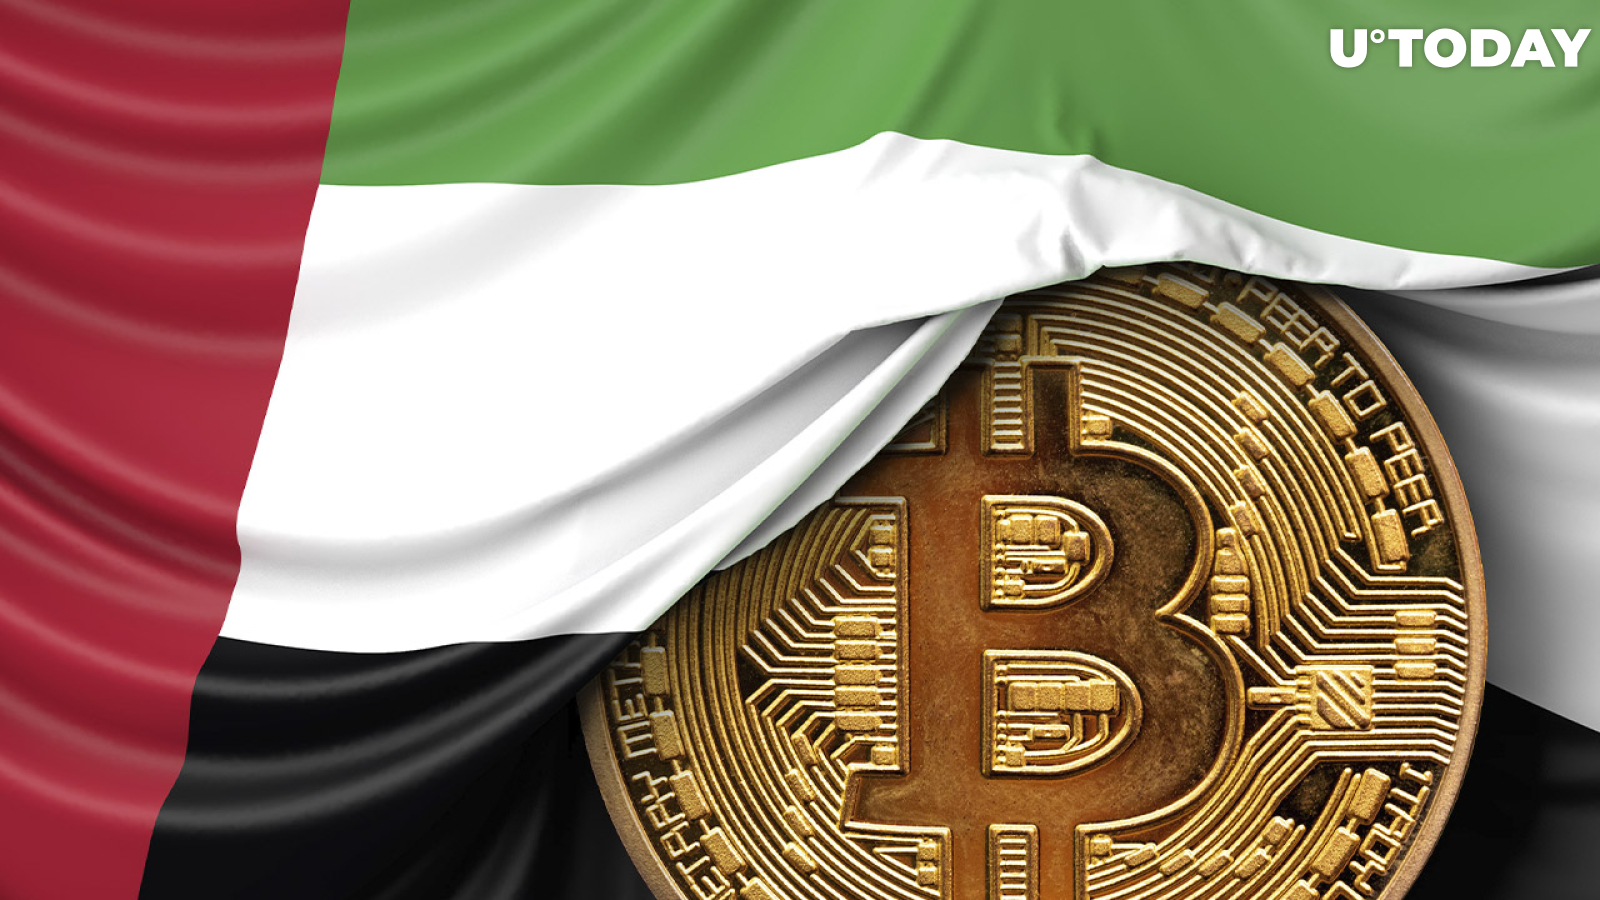 UAE Readies Regulation to Attract Global Crypto Giants and Build Mining Ecosystem